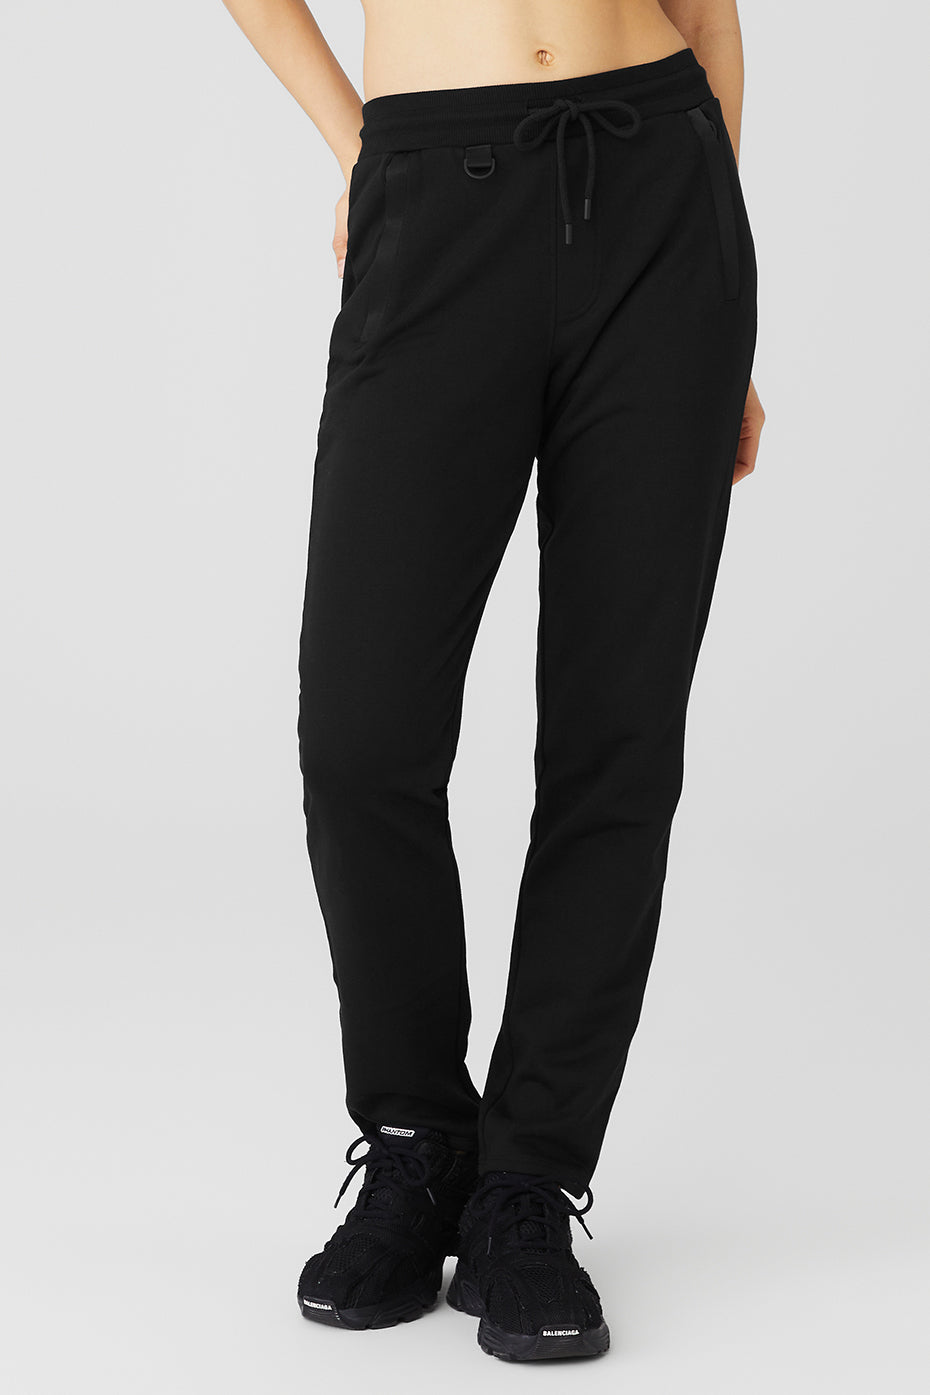 Can You Stretch Out Sweatpants? – solowomen